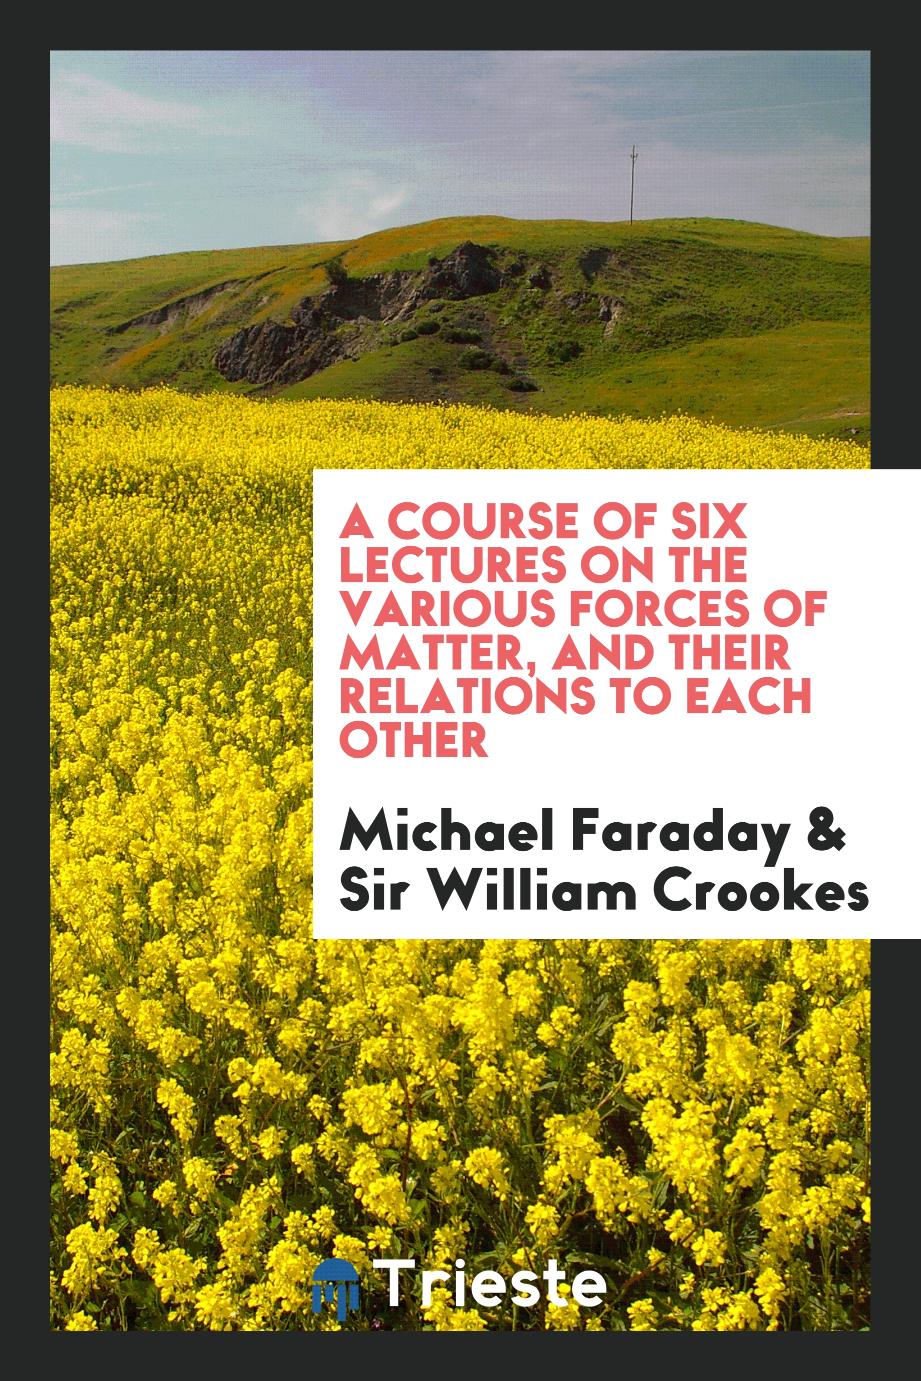 A Course of six lectures on the various forces of matter, and their relations to each other